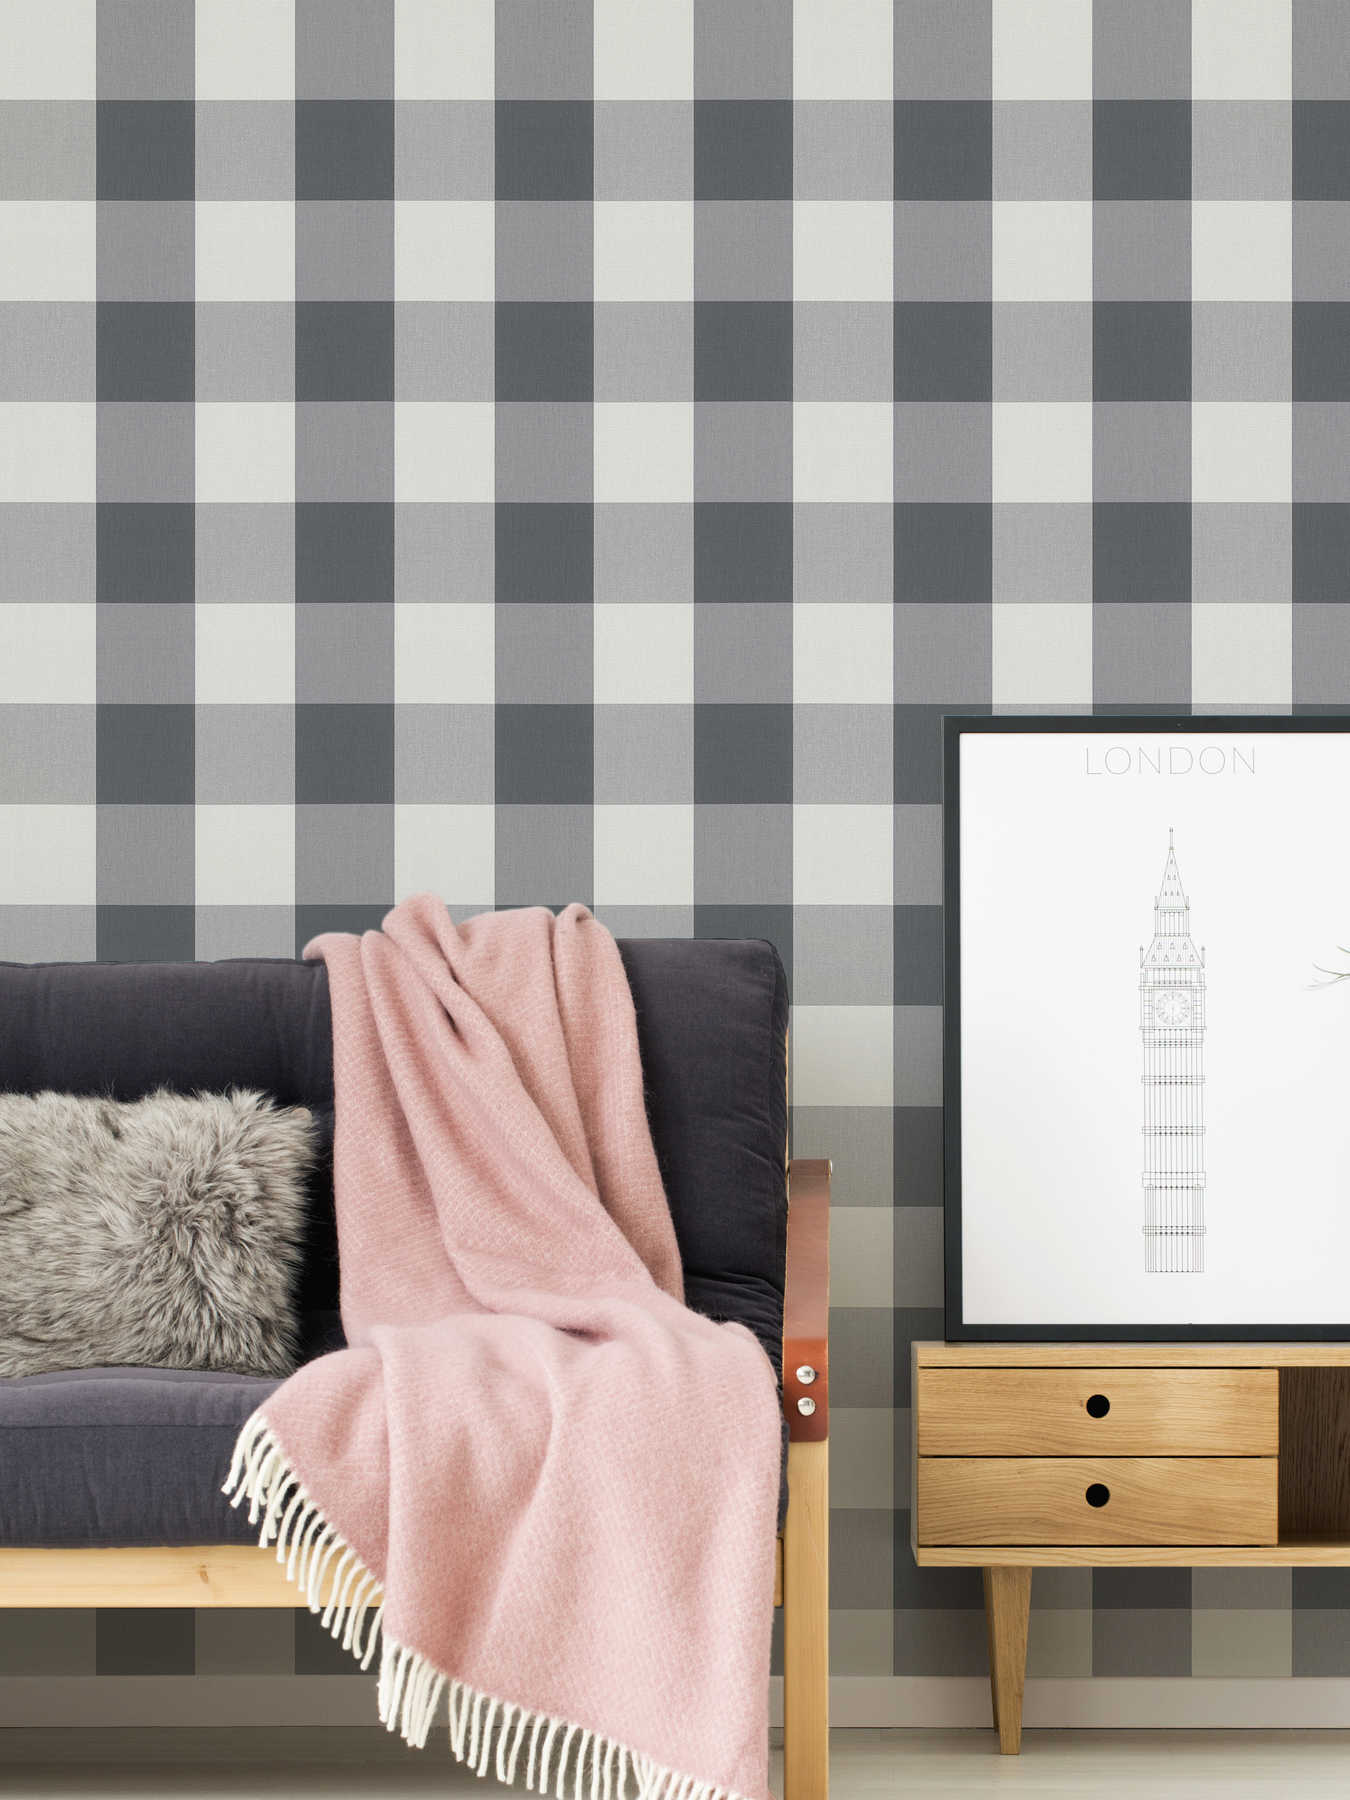             Plaid wallpaper with textile look in harmonious colours - white, grey
        